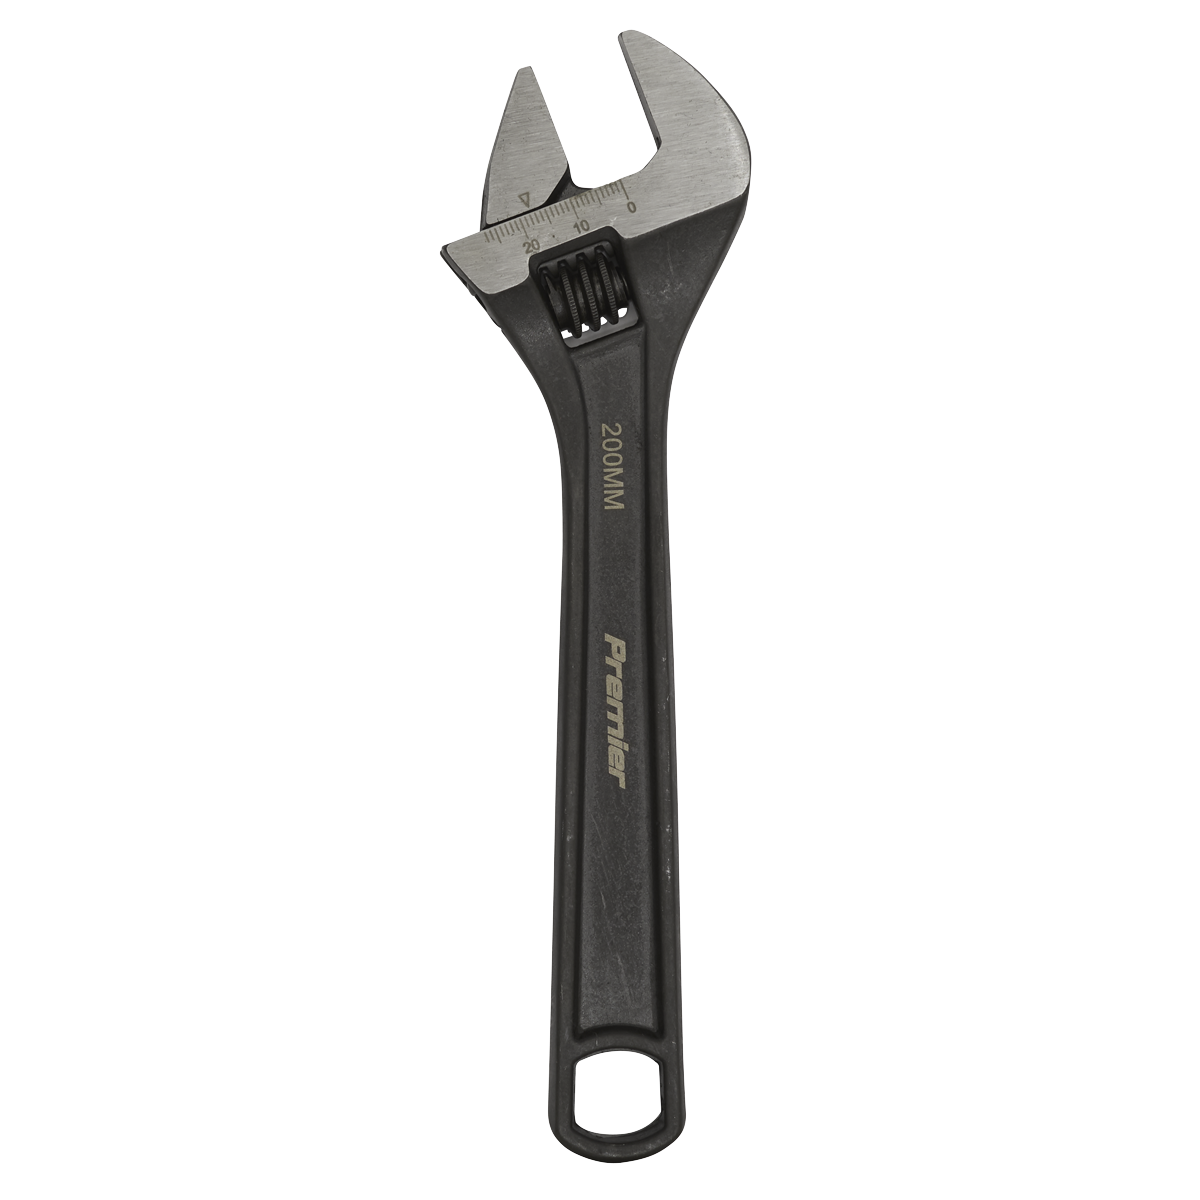 Sealey 200mm Adjustable Wrench AK9561